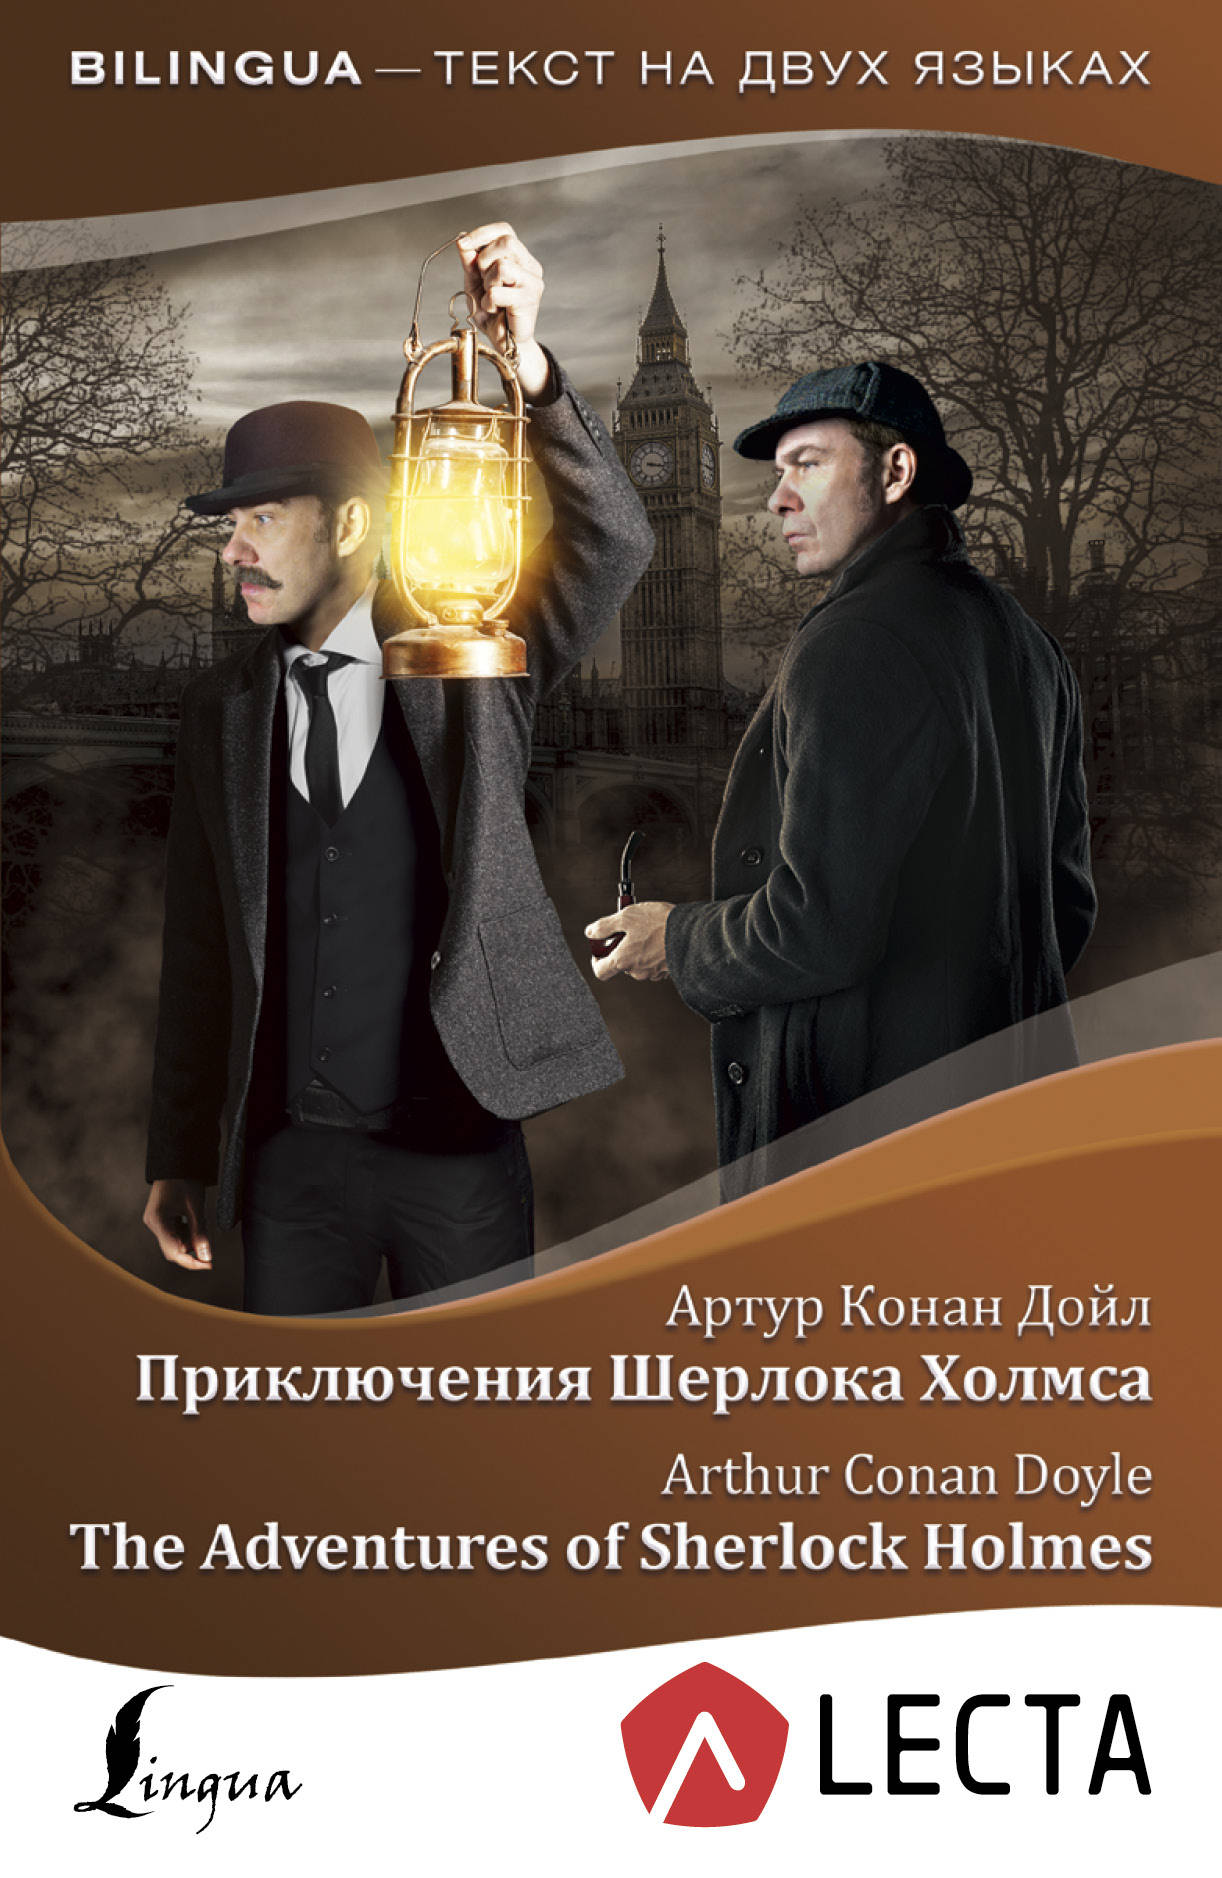    = The Adventures of Sherlock Holmes +  LECTA